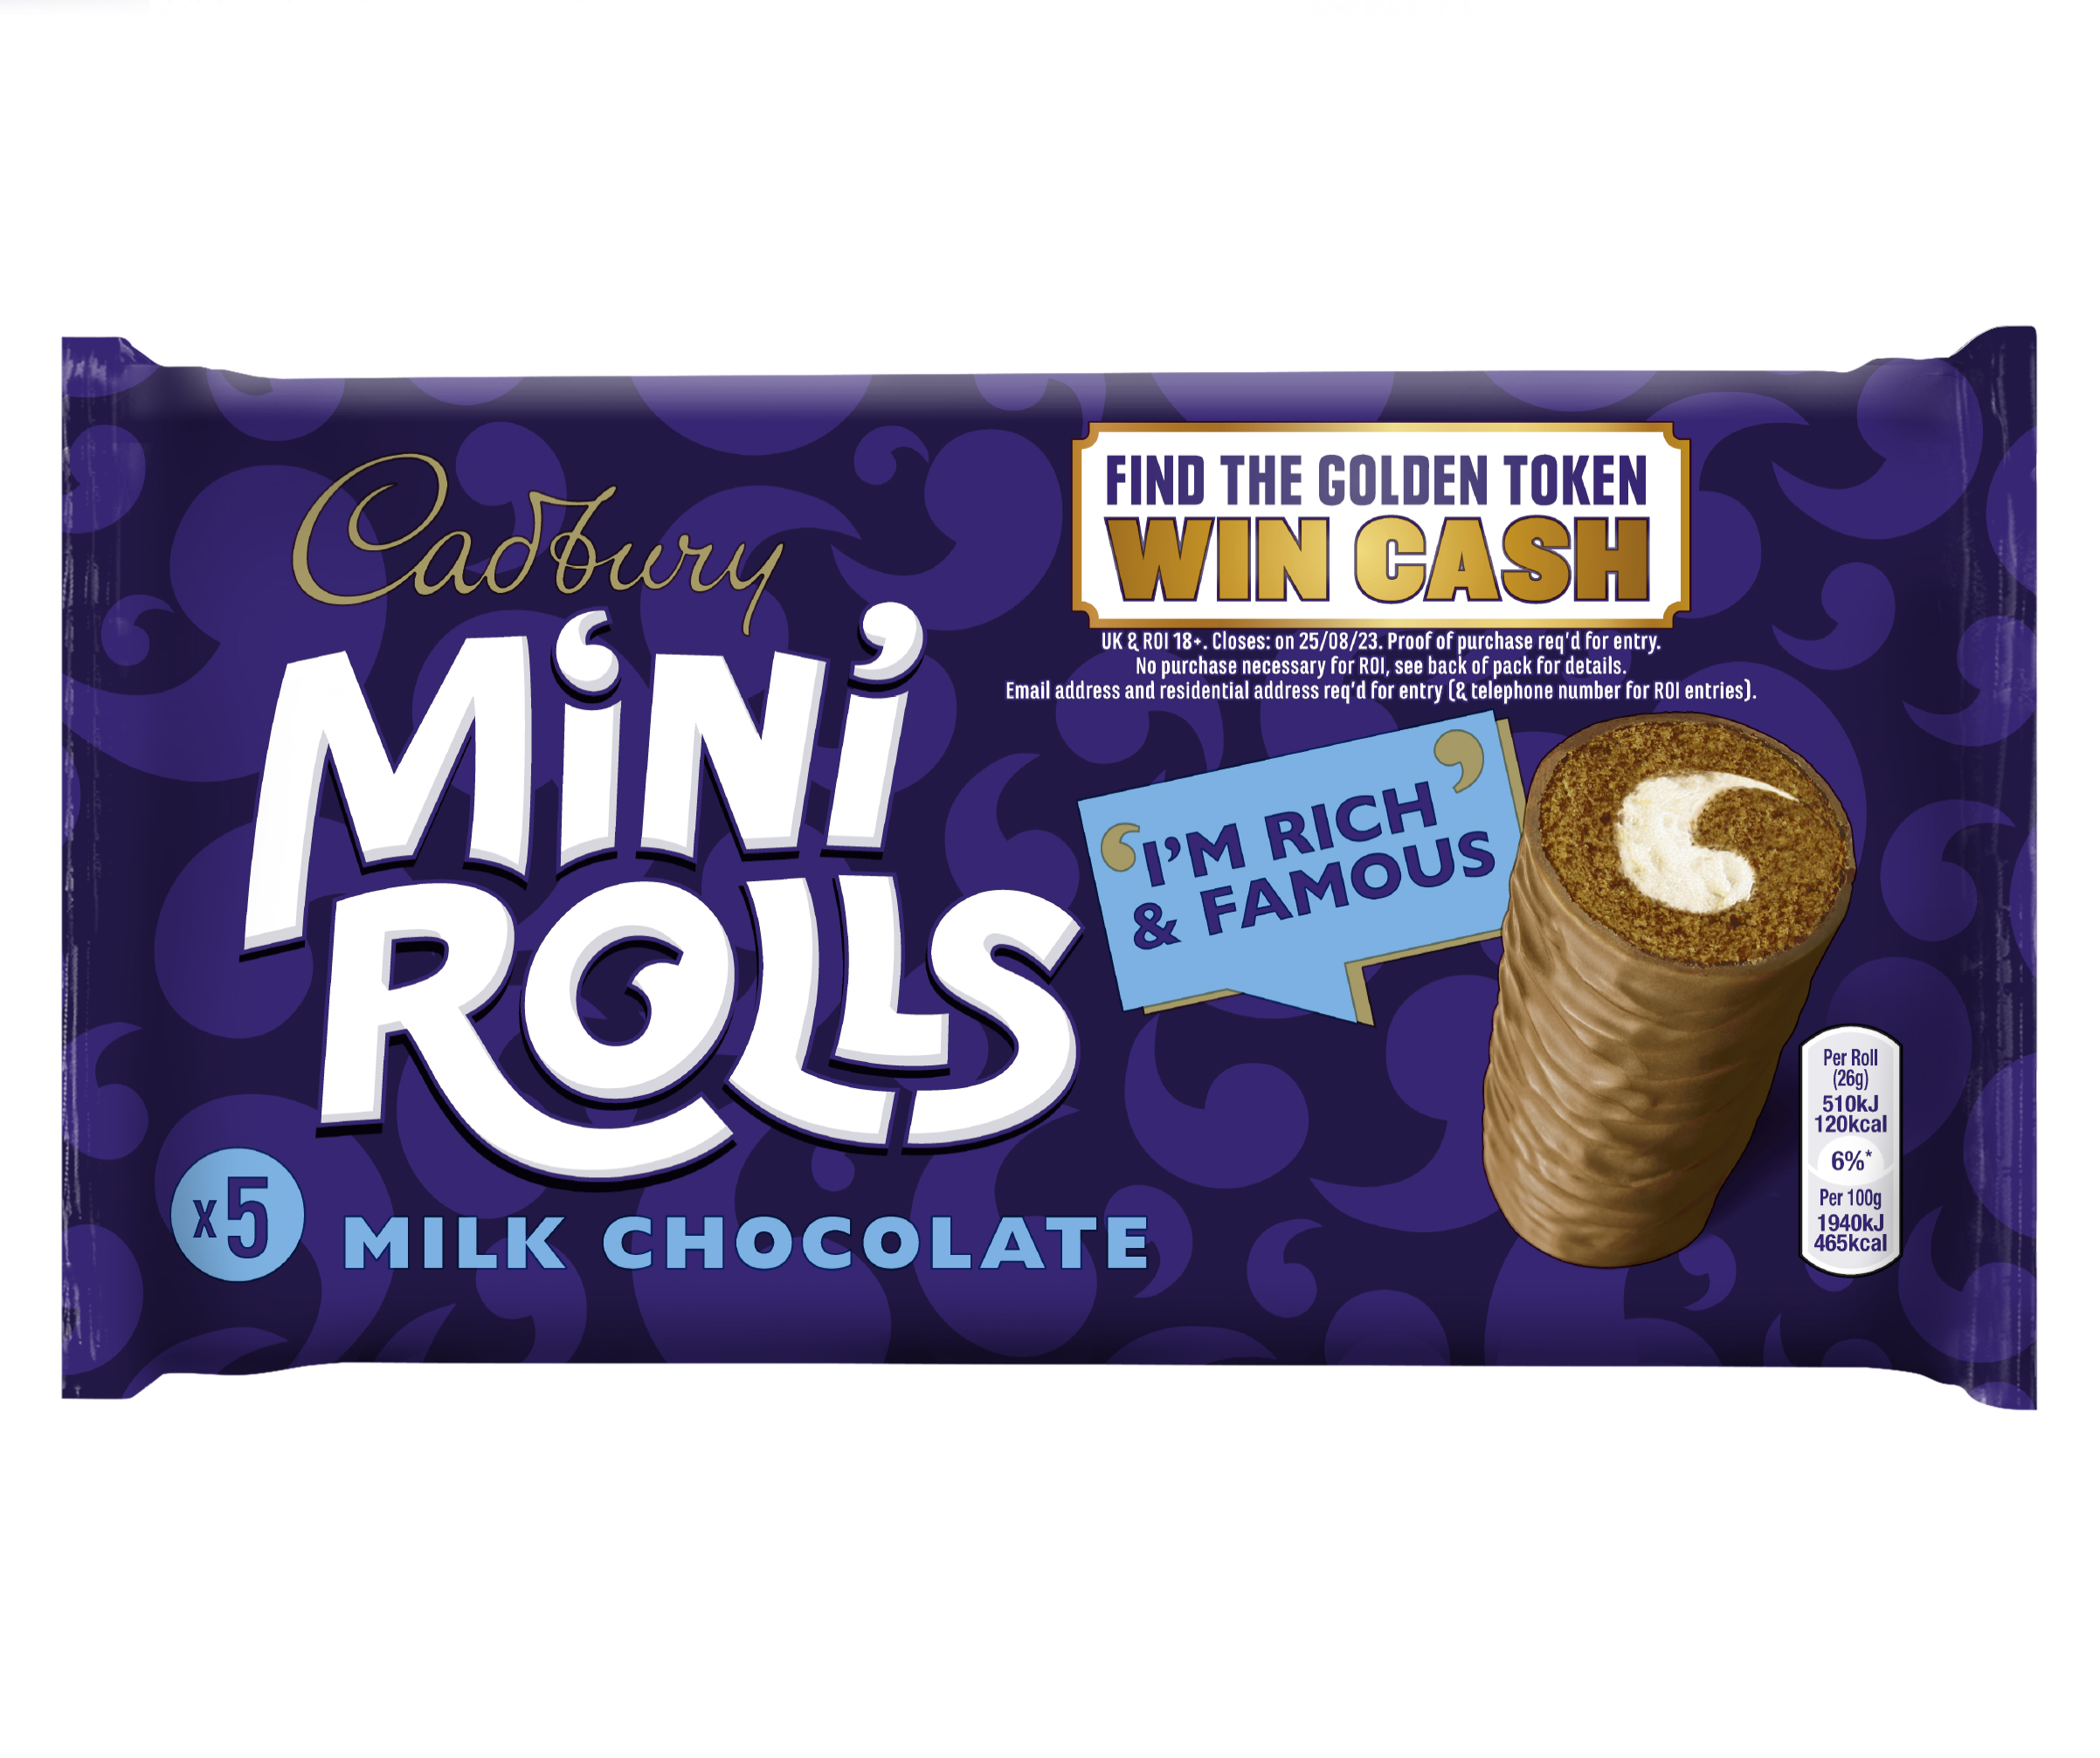 Cadbury Cakes offers cash prizes with new on-pack takeover